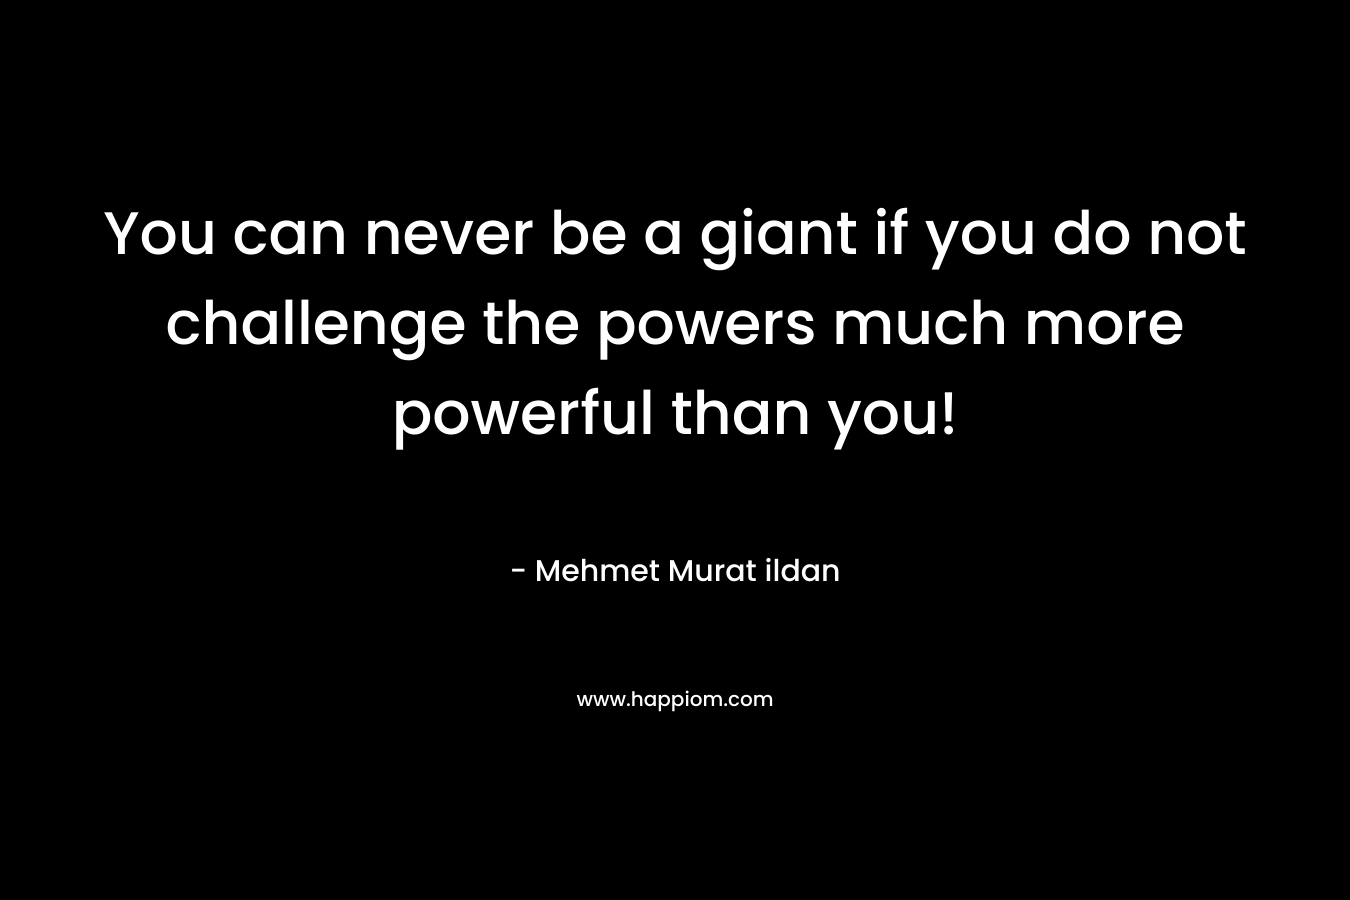 You can never be a giant if you do not challenge the powers much more powerful than you!